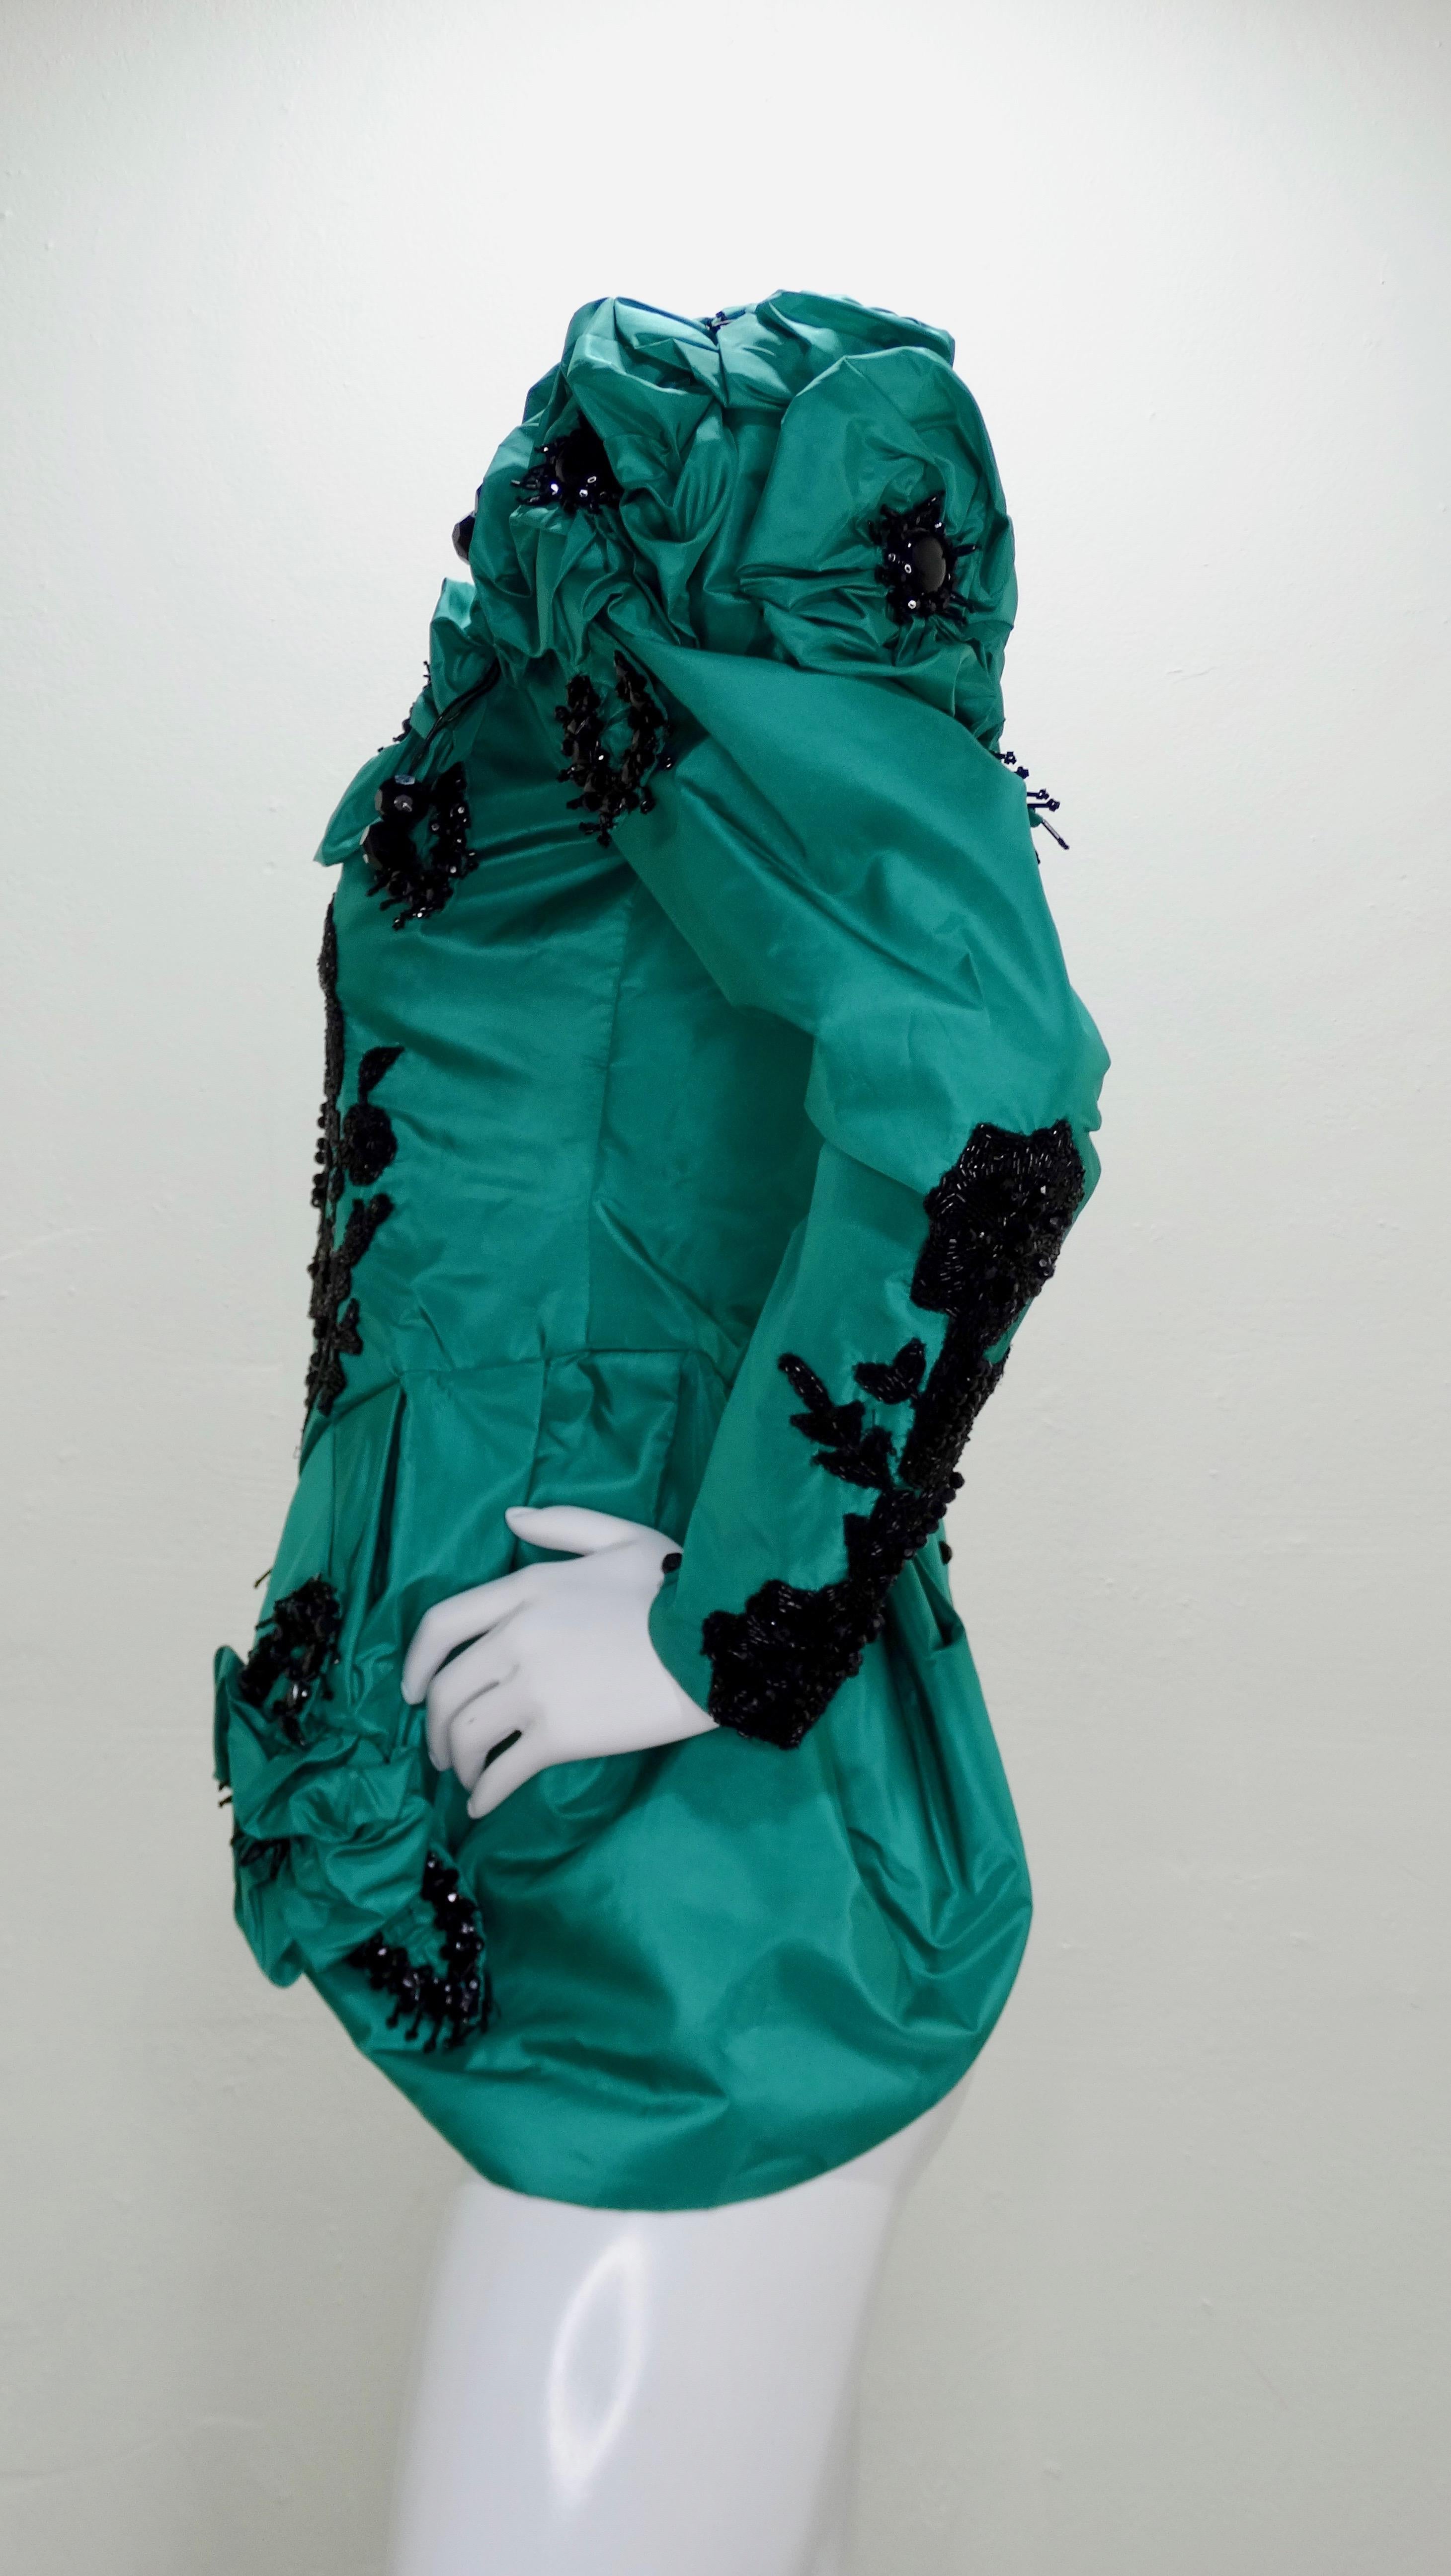 Now this is what we call vintage! Circa 1980s straight from London, this hand made Eavis and Brown for Capriccio haute couture blouse is crafted from rich green Silk and features leg-o-mutton sleeves with billowy fabric flowers and button cuffs, an